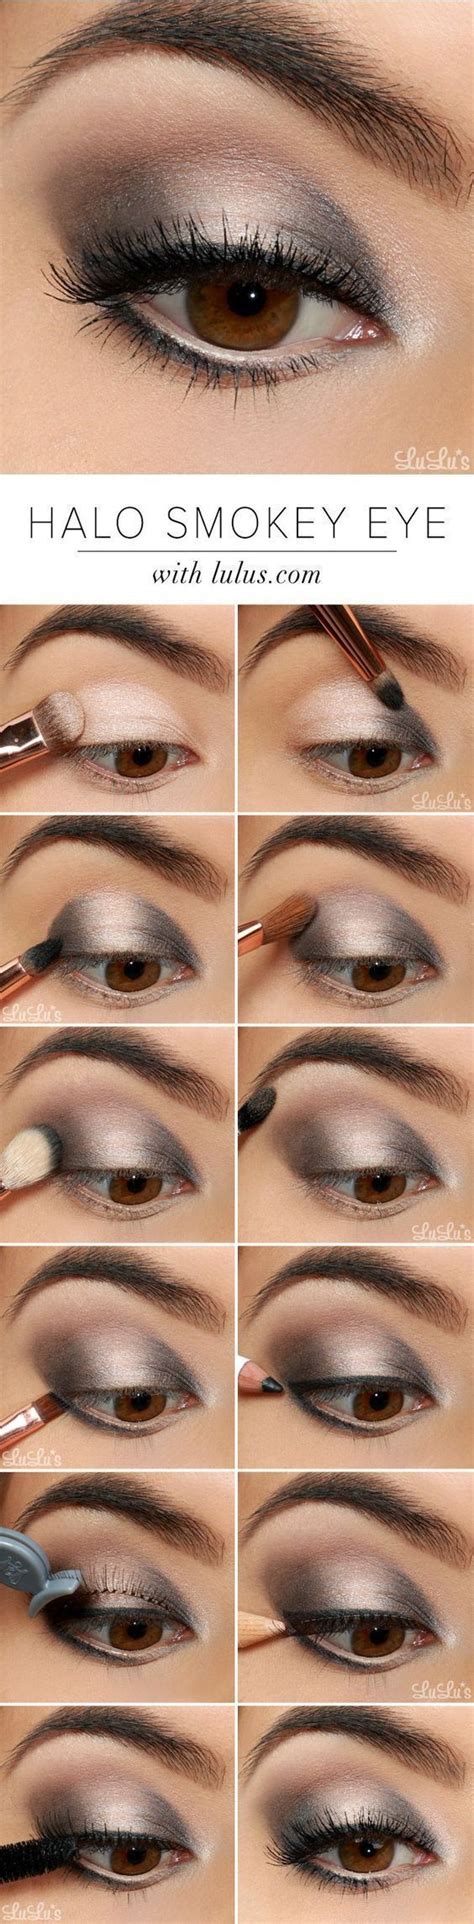 10 Quick And Easy Smokey Eye Makeup Instructions Step By Step With